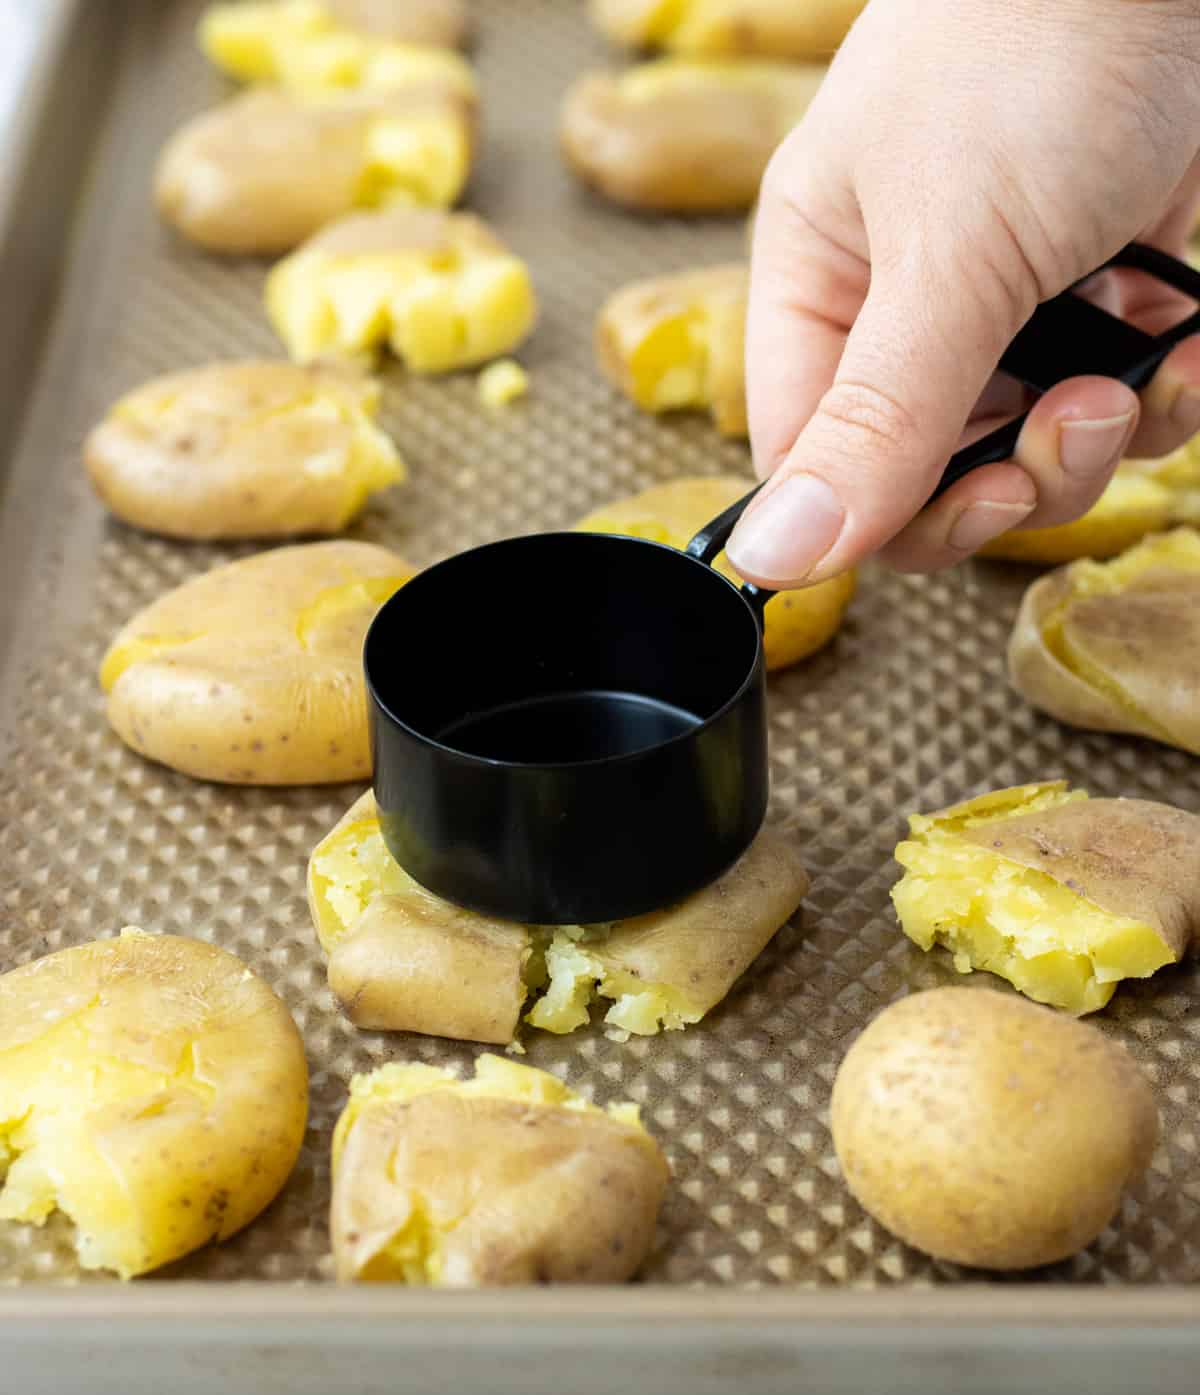 A hand holding a measuring cup pressed down on a fingerling potato.